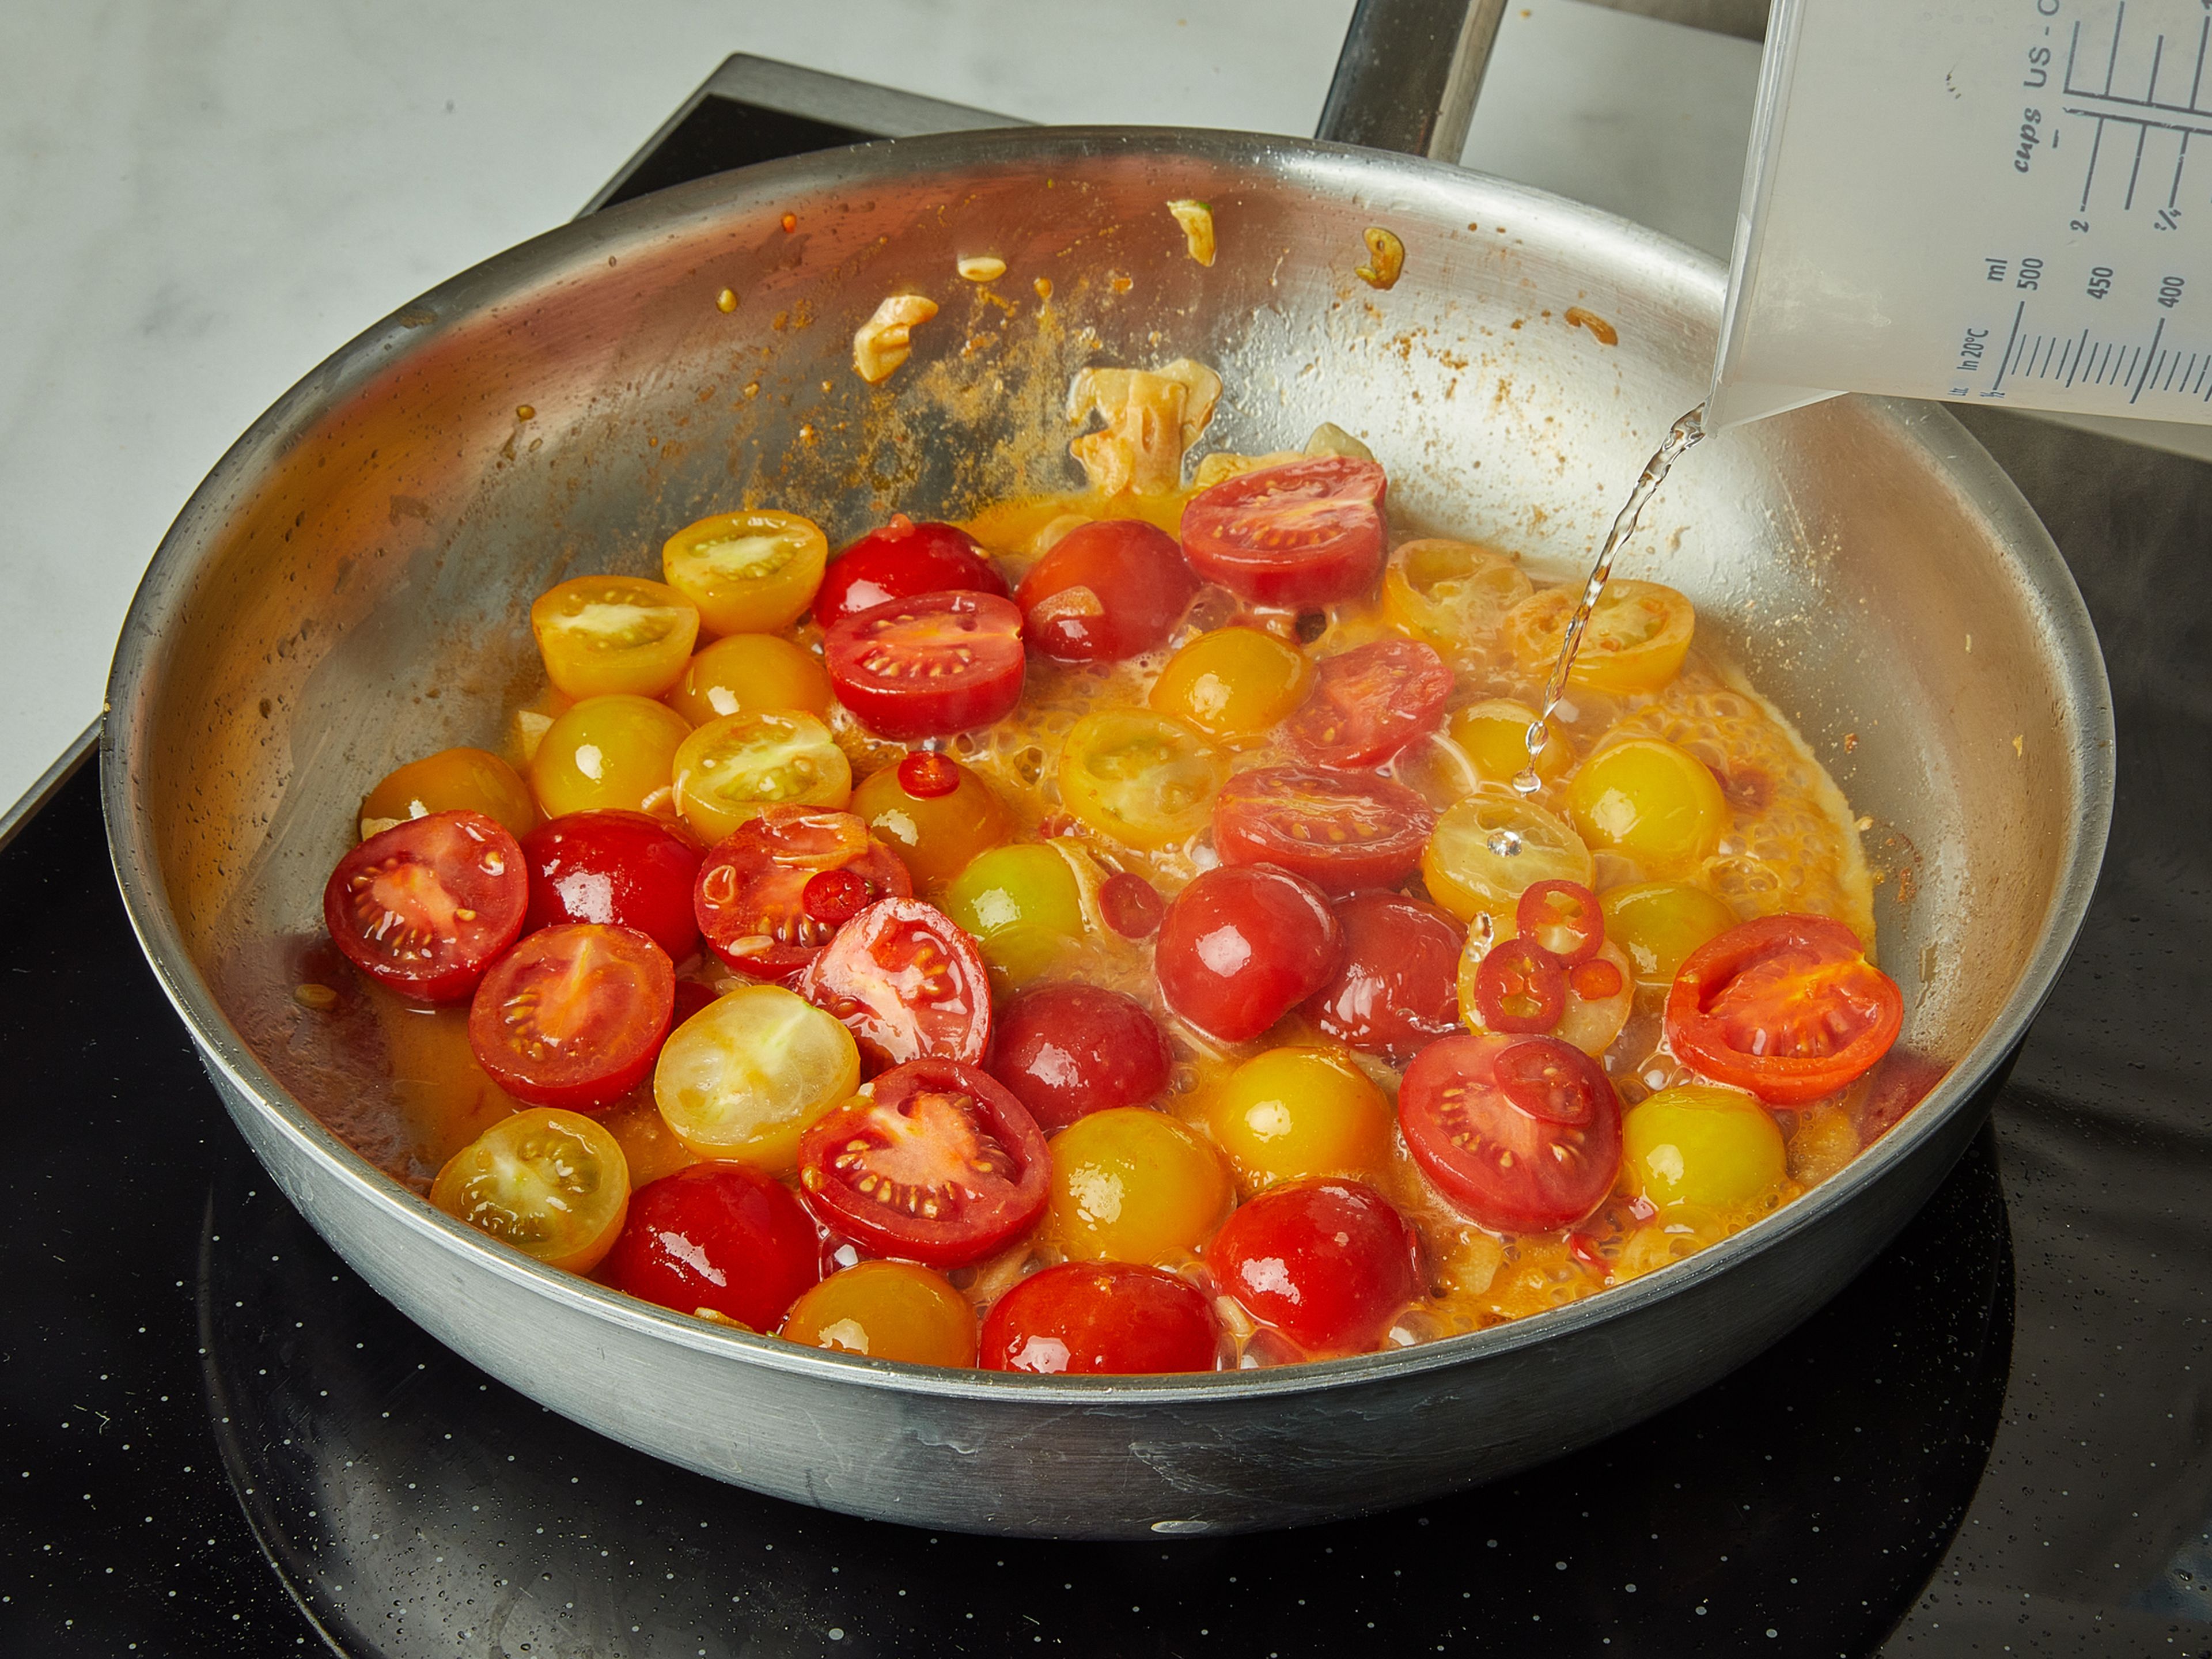 In the same pan heat the remaining olive oil. Add garlic, chili, and tomatoes and sauté together for approx. 2 min. Then deglaze with white wine.  Let simmer for approx. 2 min. until the wine has almost boiled away. Season everything with a generous pinch of salt and pepper.